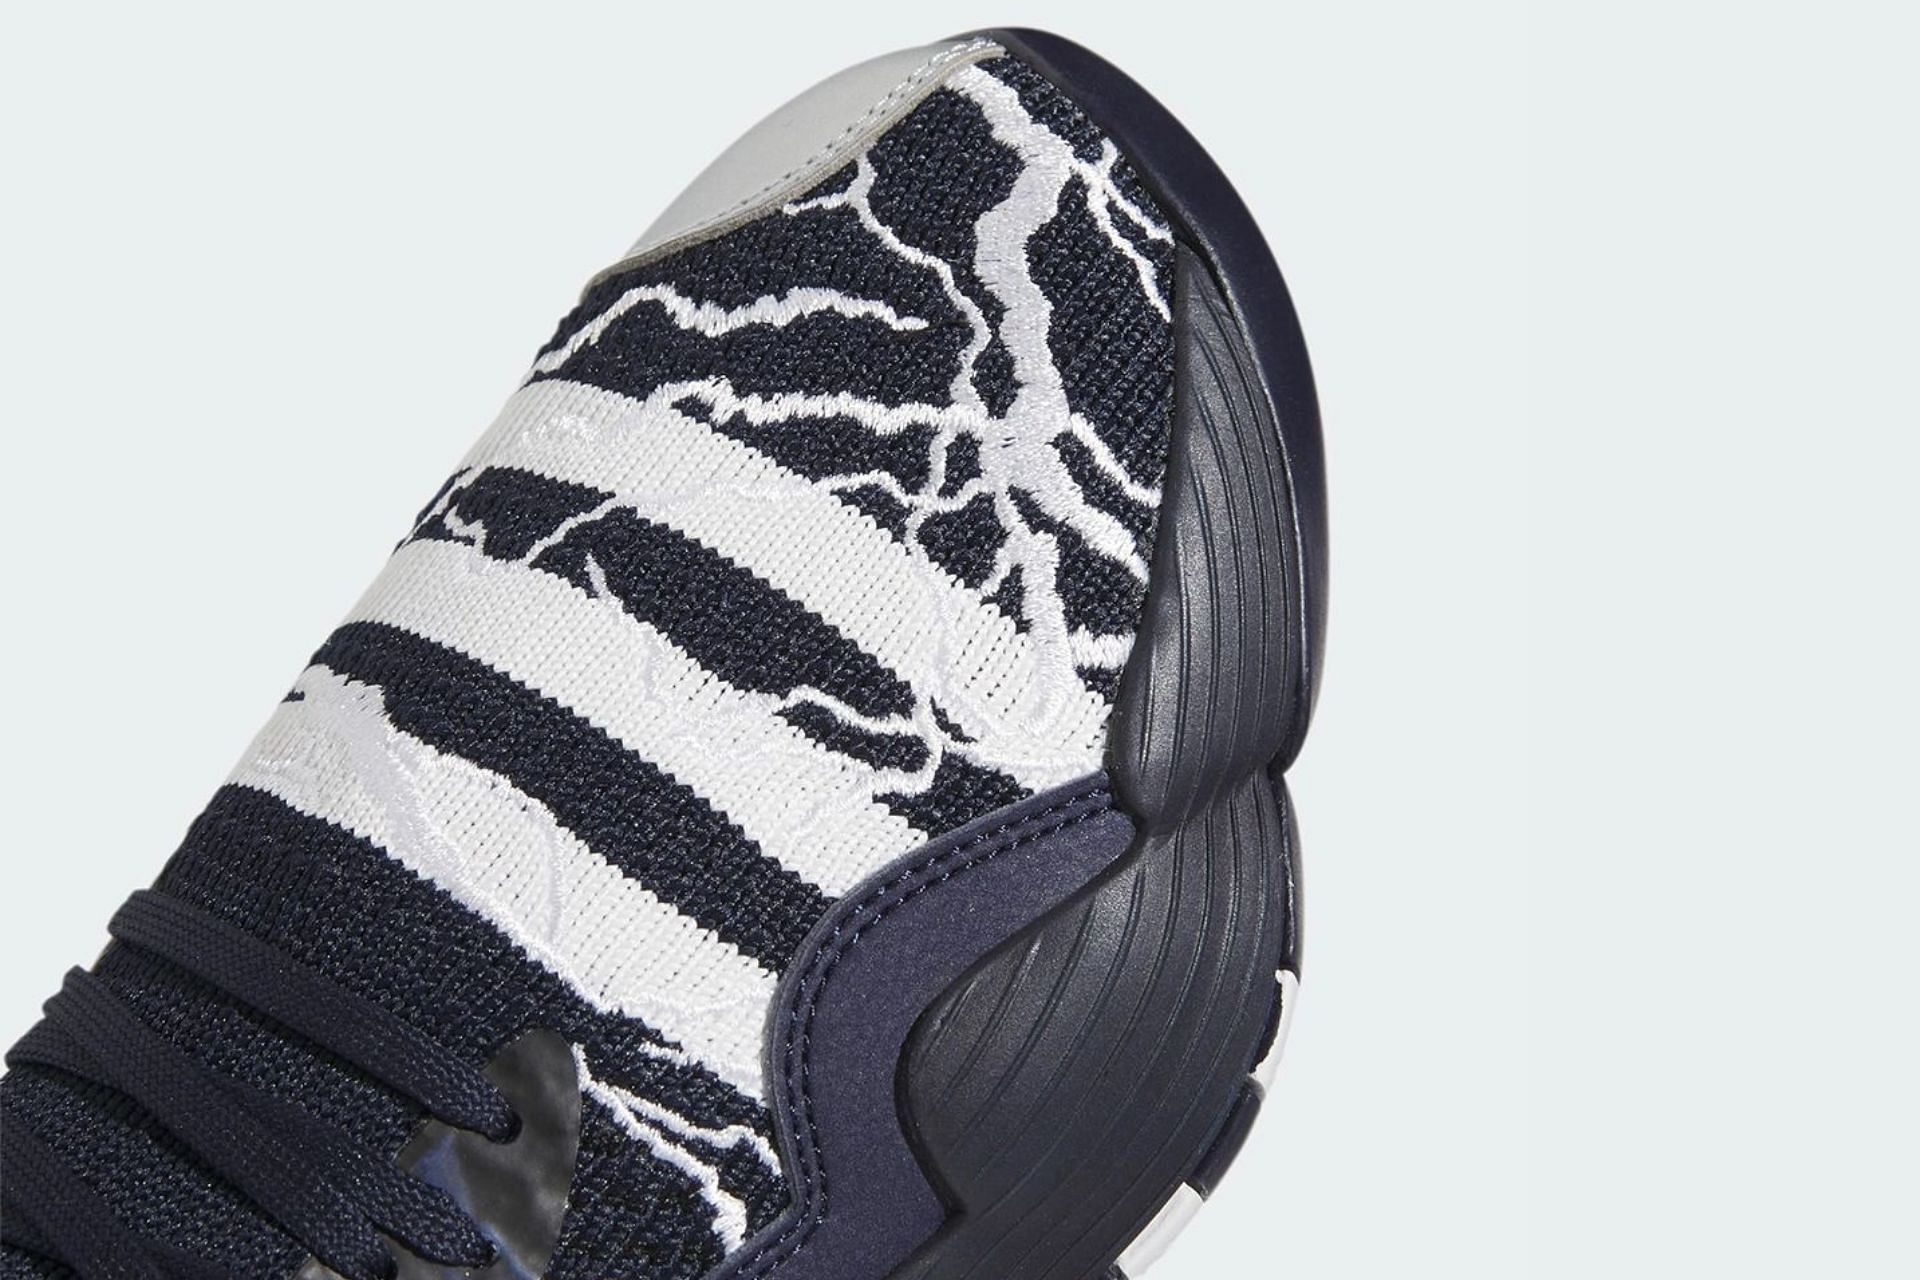 Take a closer look at the thunder lightning designs on the toe tops of the sneakers (Image via Adidas)